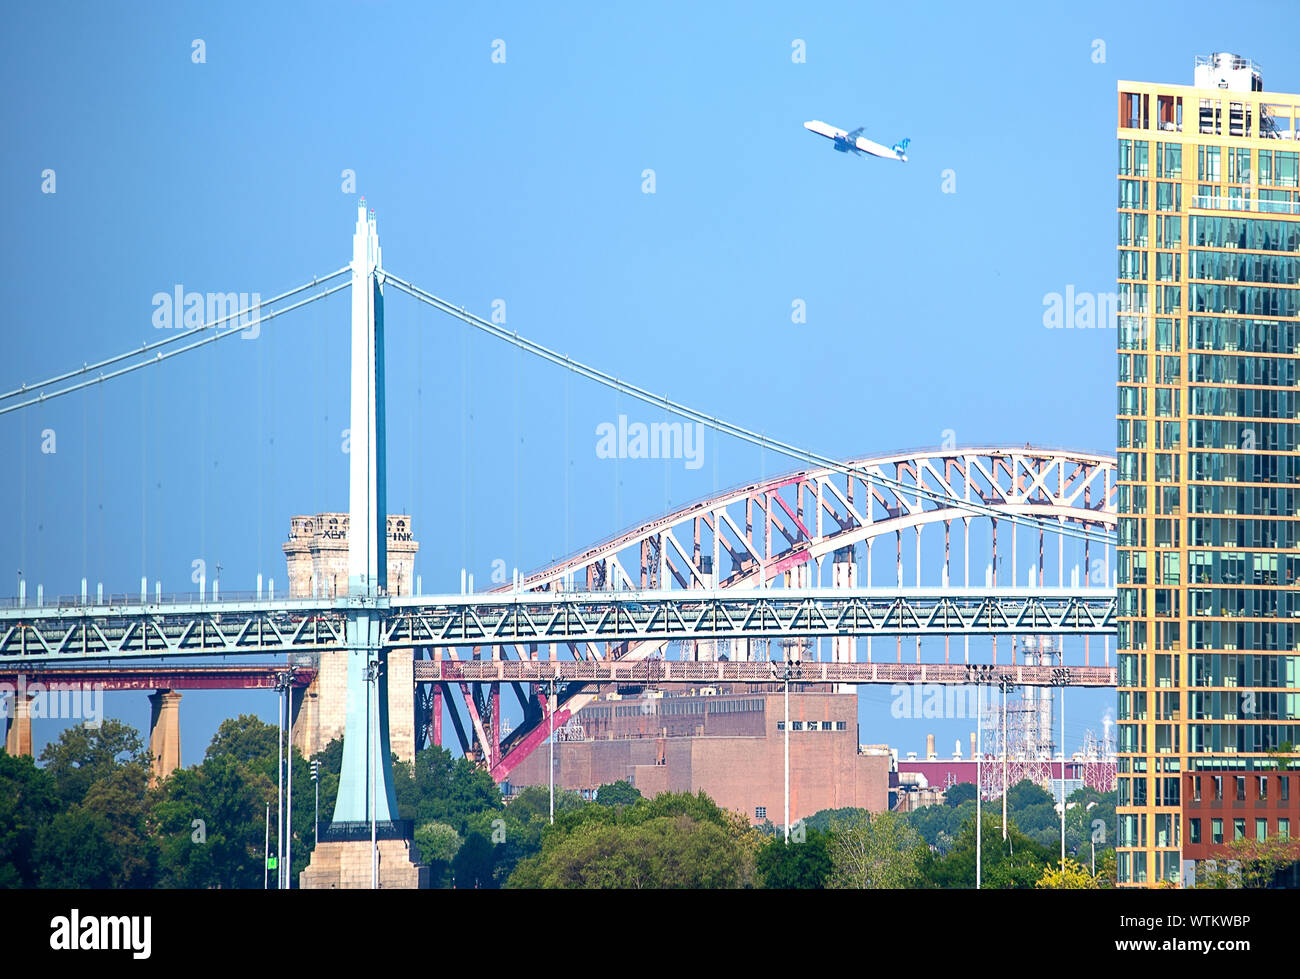 Bridges Of New York, an airplane taking off from LaGuardia Airport Stock Photo